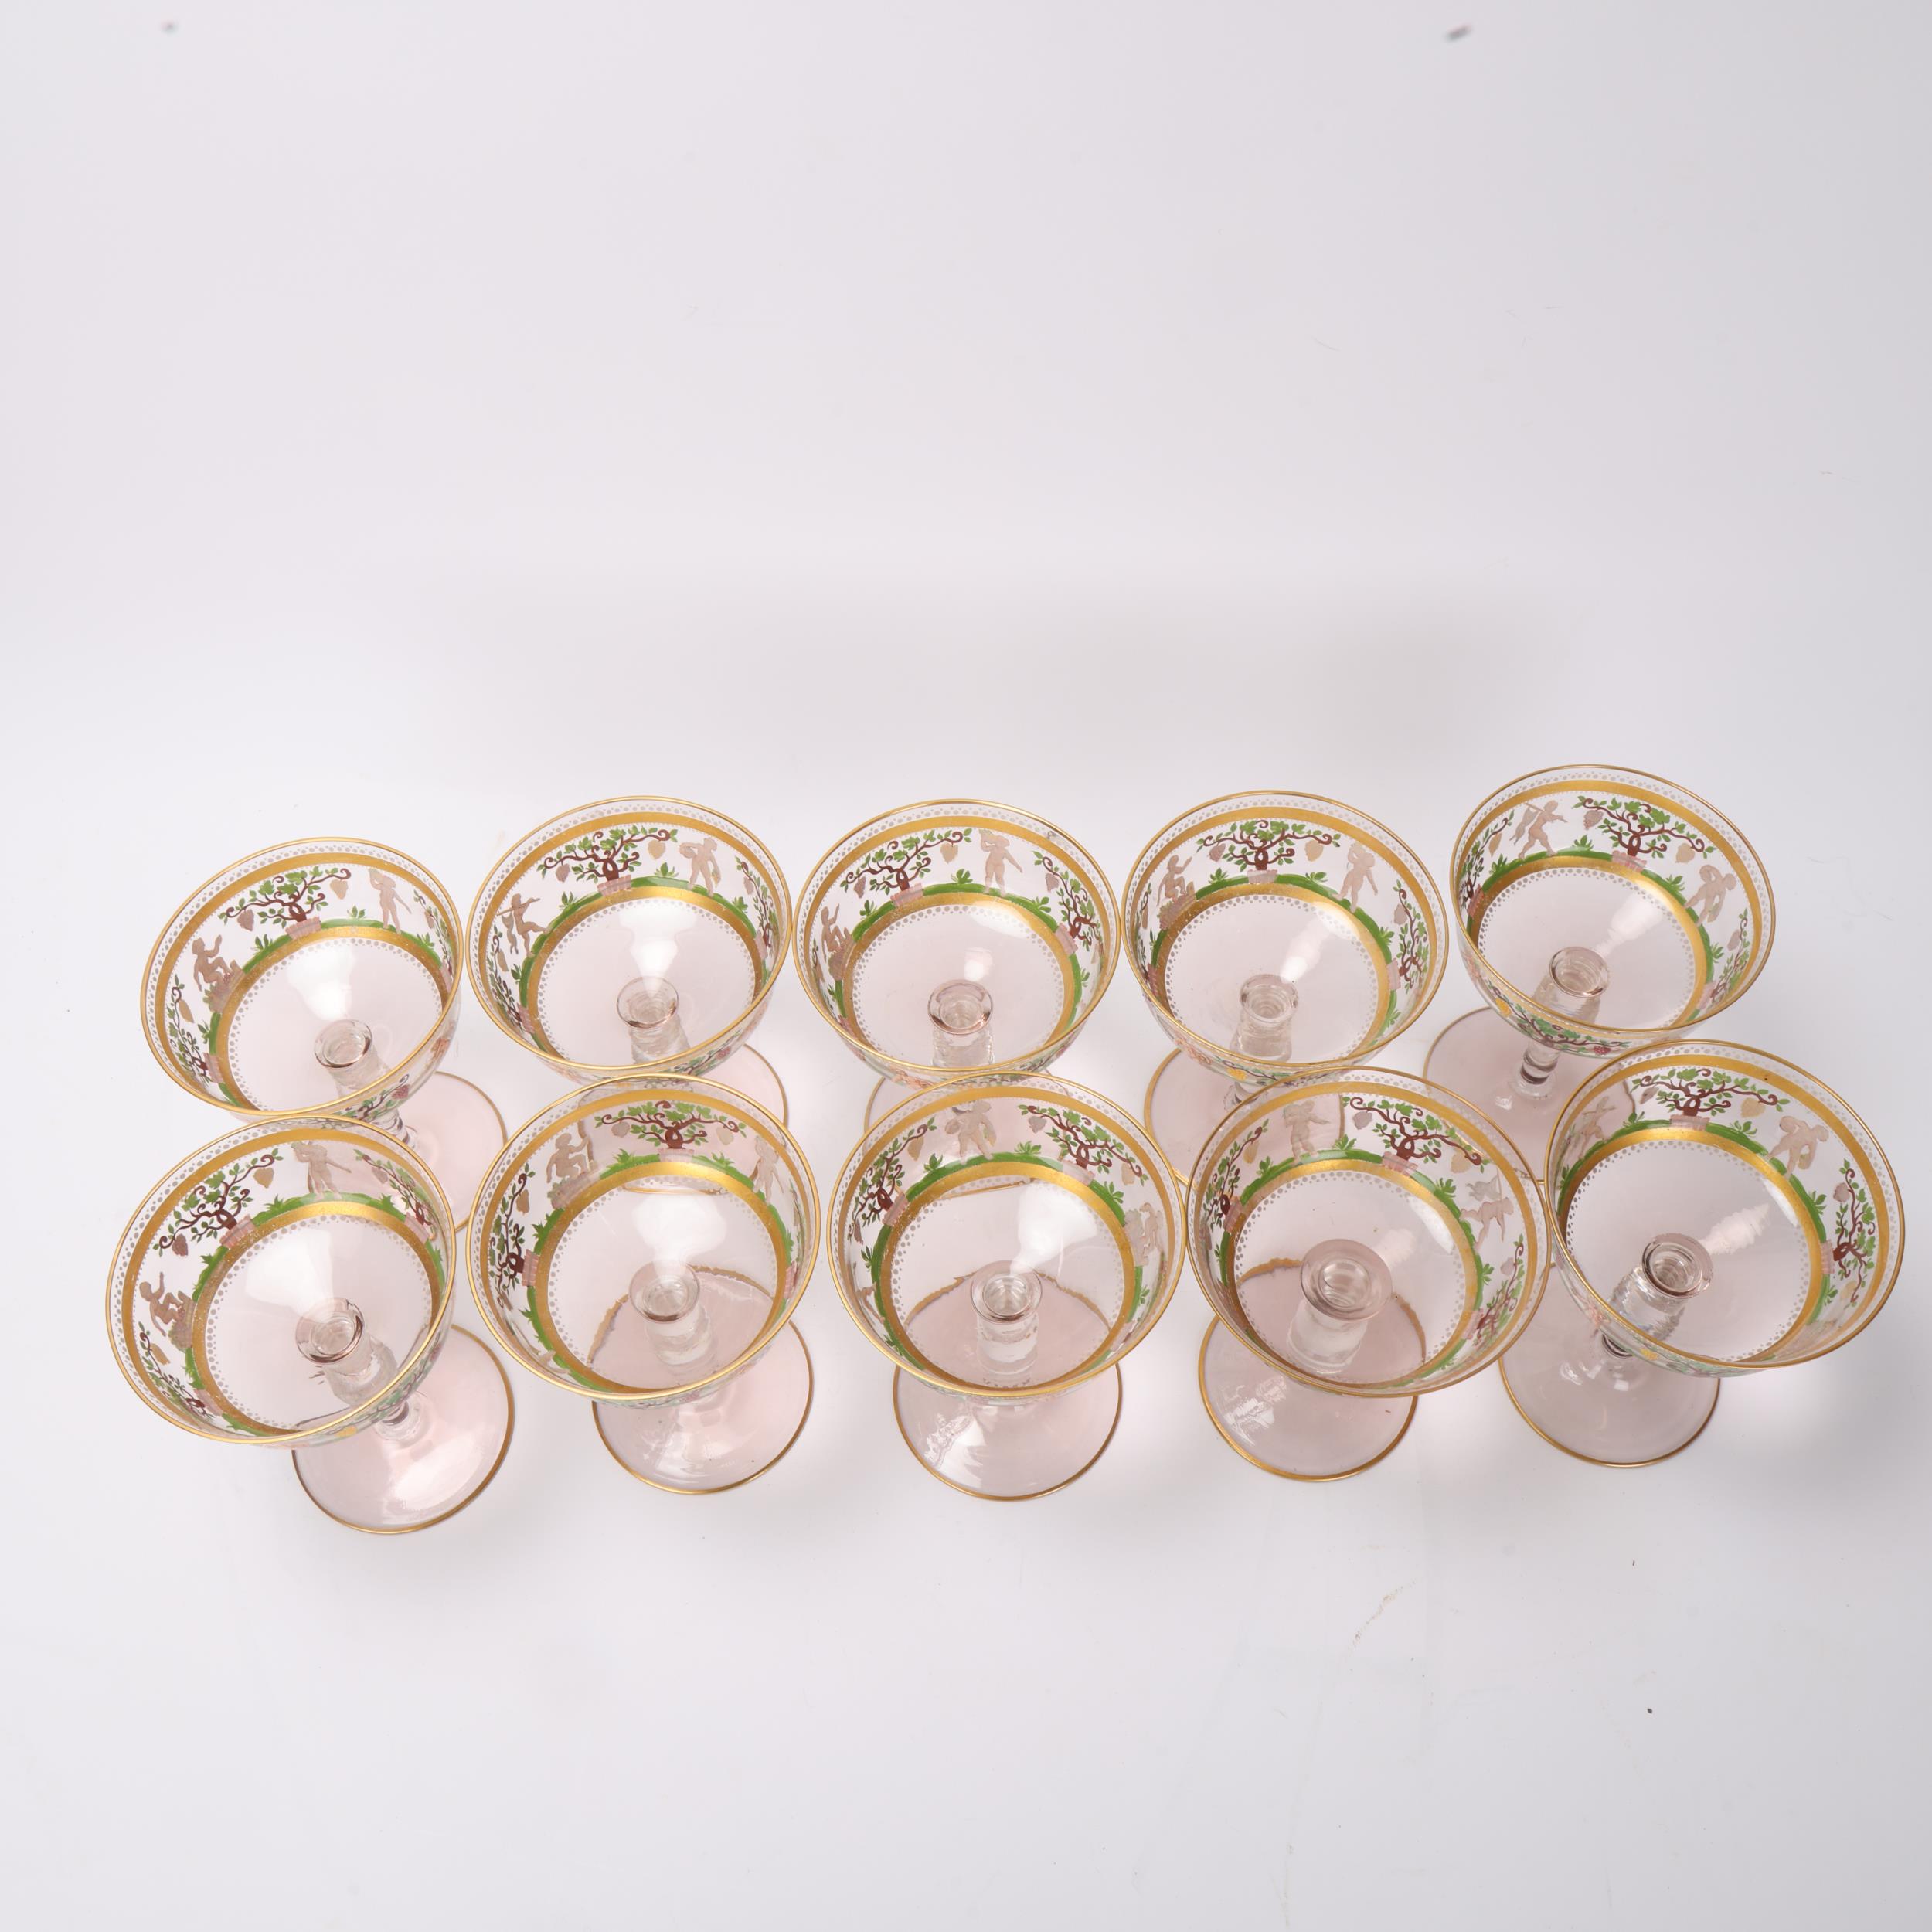 **DESCRIPTION CHANGE** A set of 10 *Venetian/Bohemian* Champagne glasses, with hand painted enamel a - Image 3 of 3